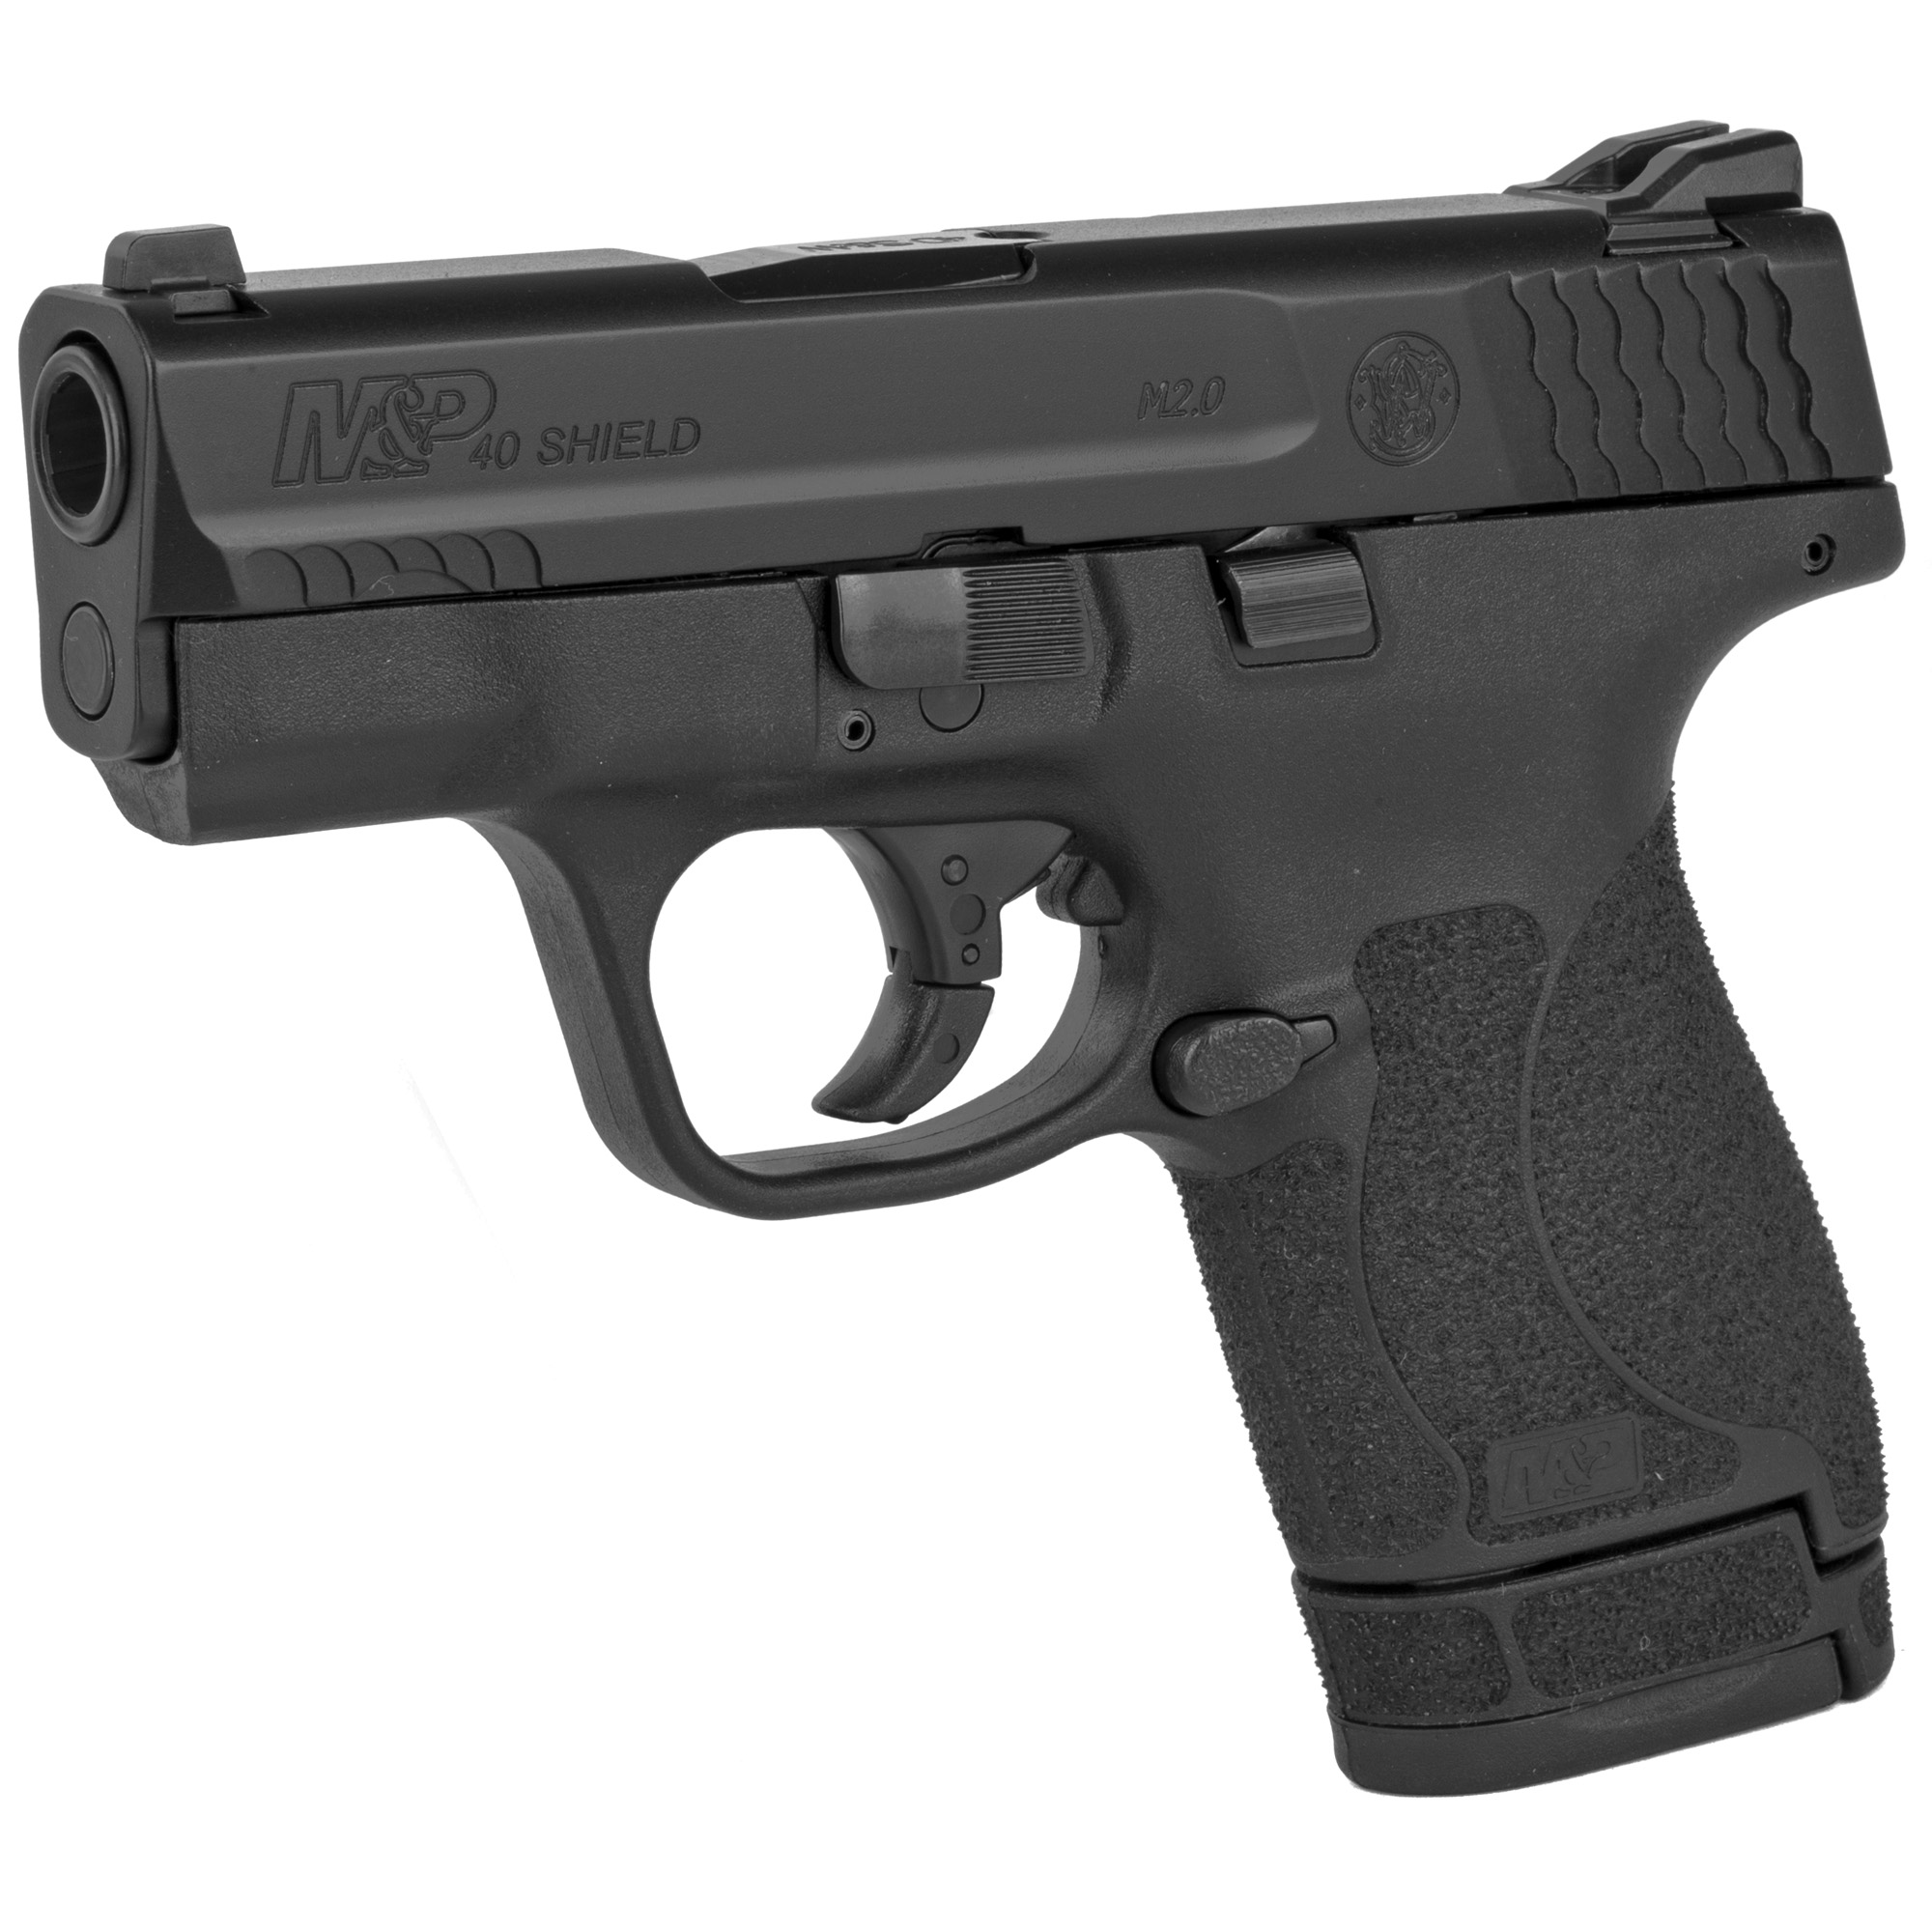 Smith & Wesson, Shield M2.0, Striker Fired, Semi-automatic, Polymer Frame Pistol, Micro-Compact, 40 S&W, 3.1" Barrel, Armornite Finish, Black, 3 Dot Sights, No Thumb Safety, 2 Magazines (1) 6-Round and (1) 7-Round